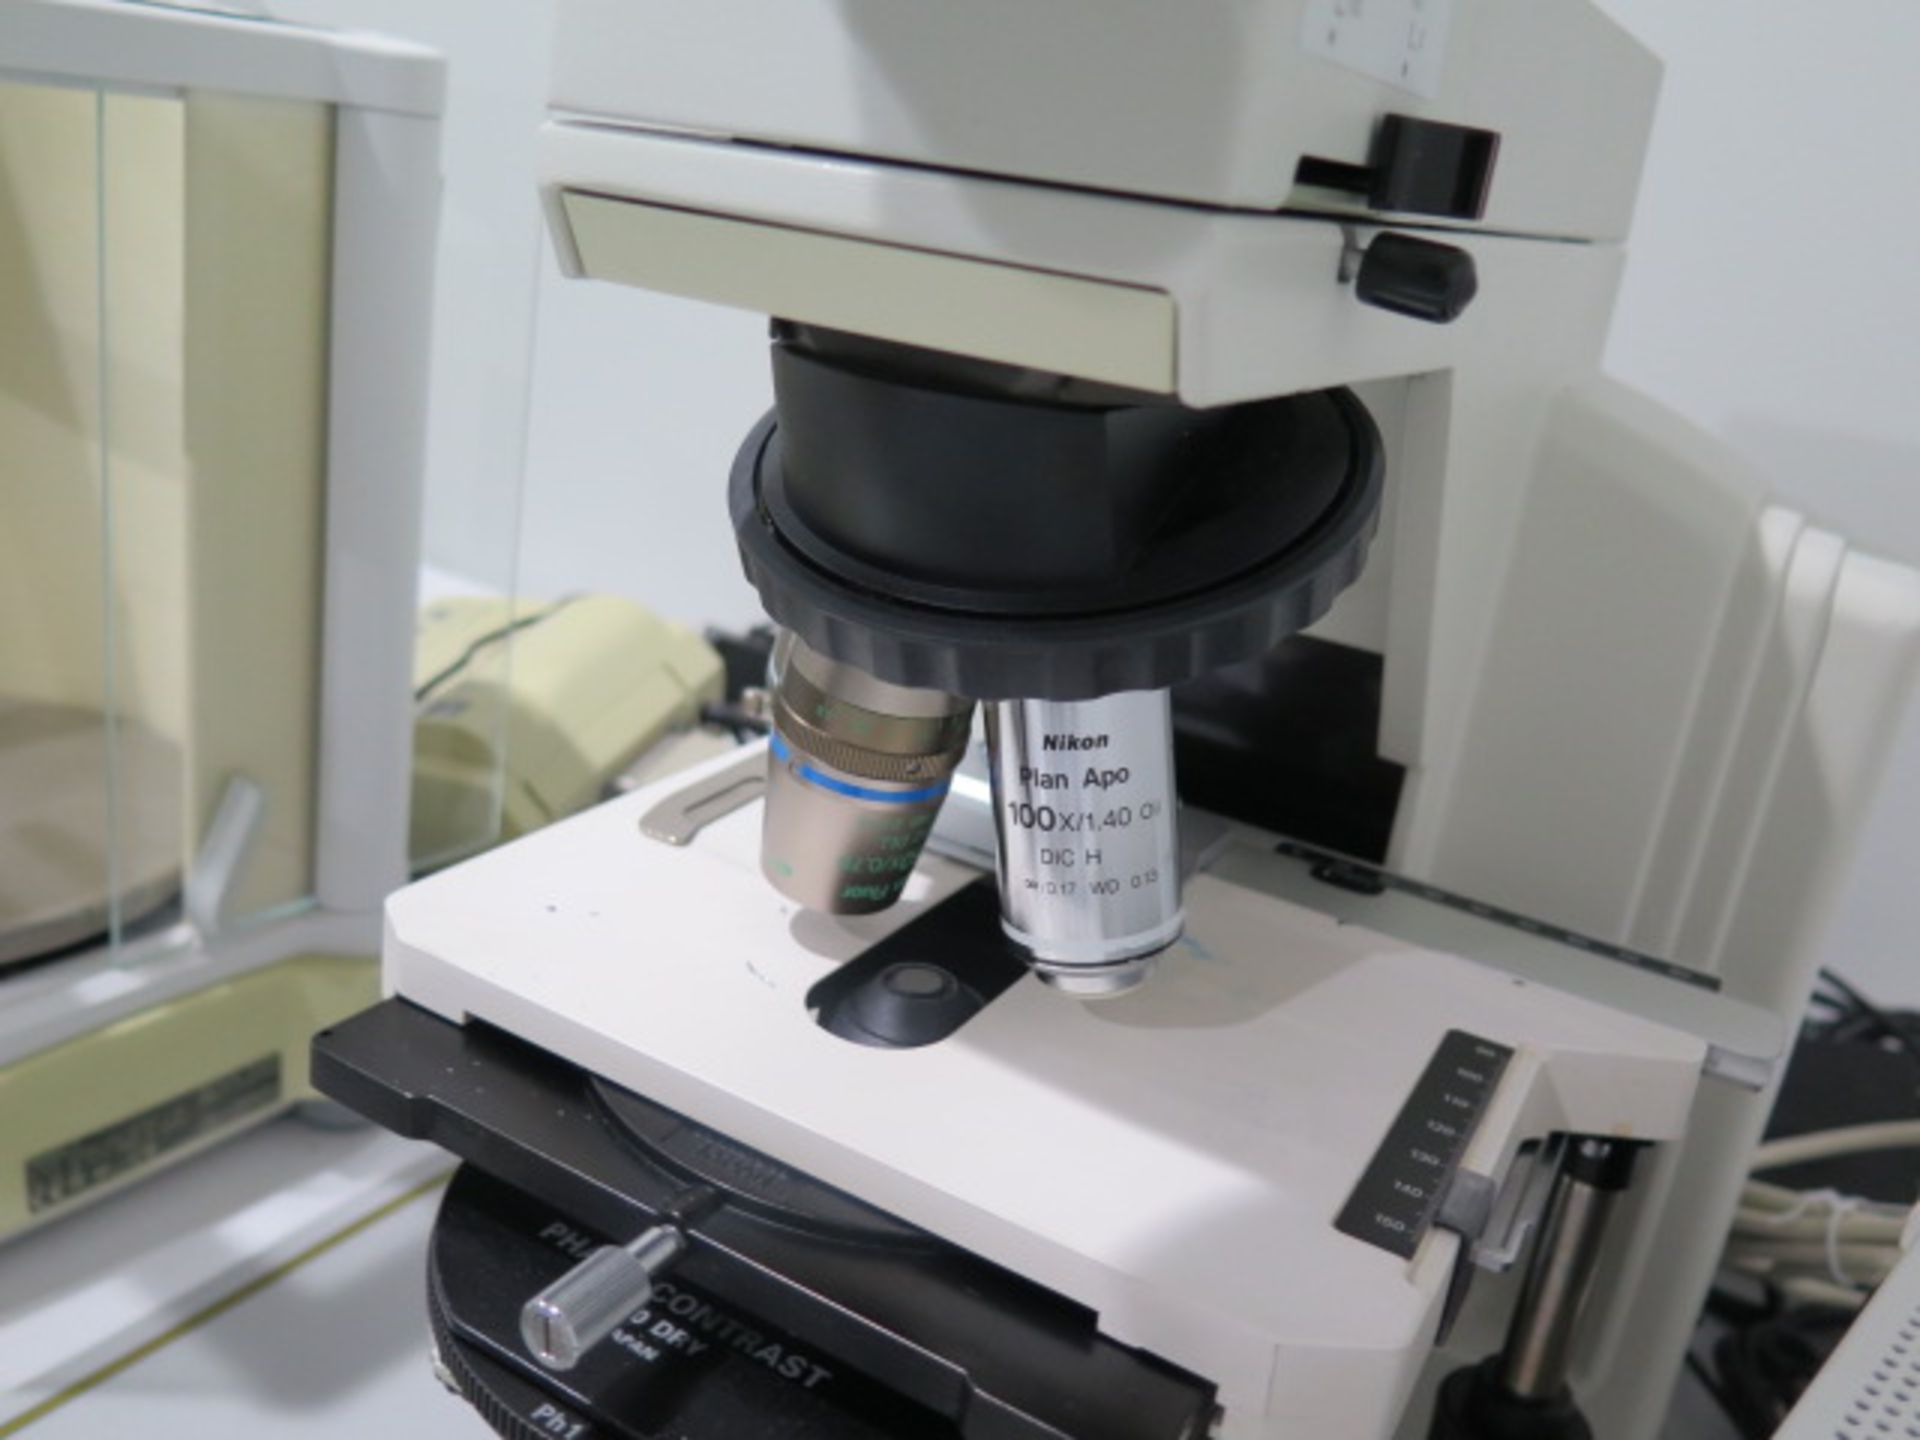 Nikon Eclipse E600 Research Microscope s/n 763673 w/ Nikon Light,DS-U2 Digital Sight Unit,SOLD AS IS - Image 5 of 15